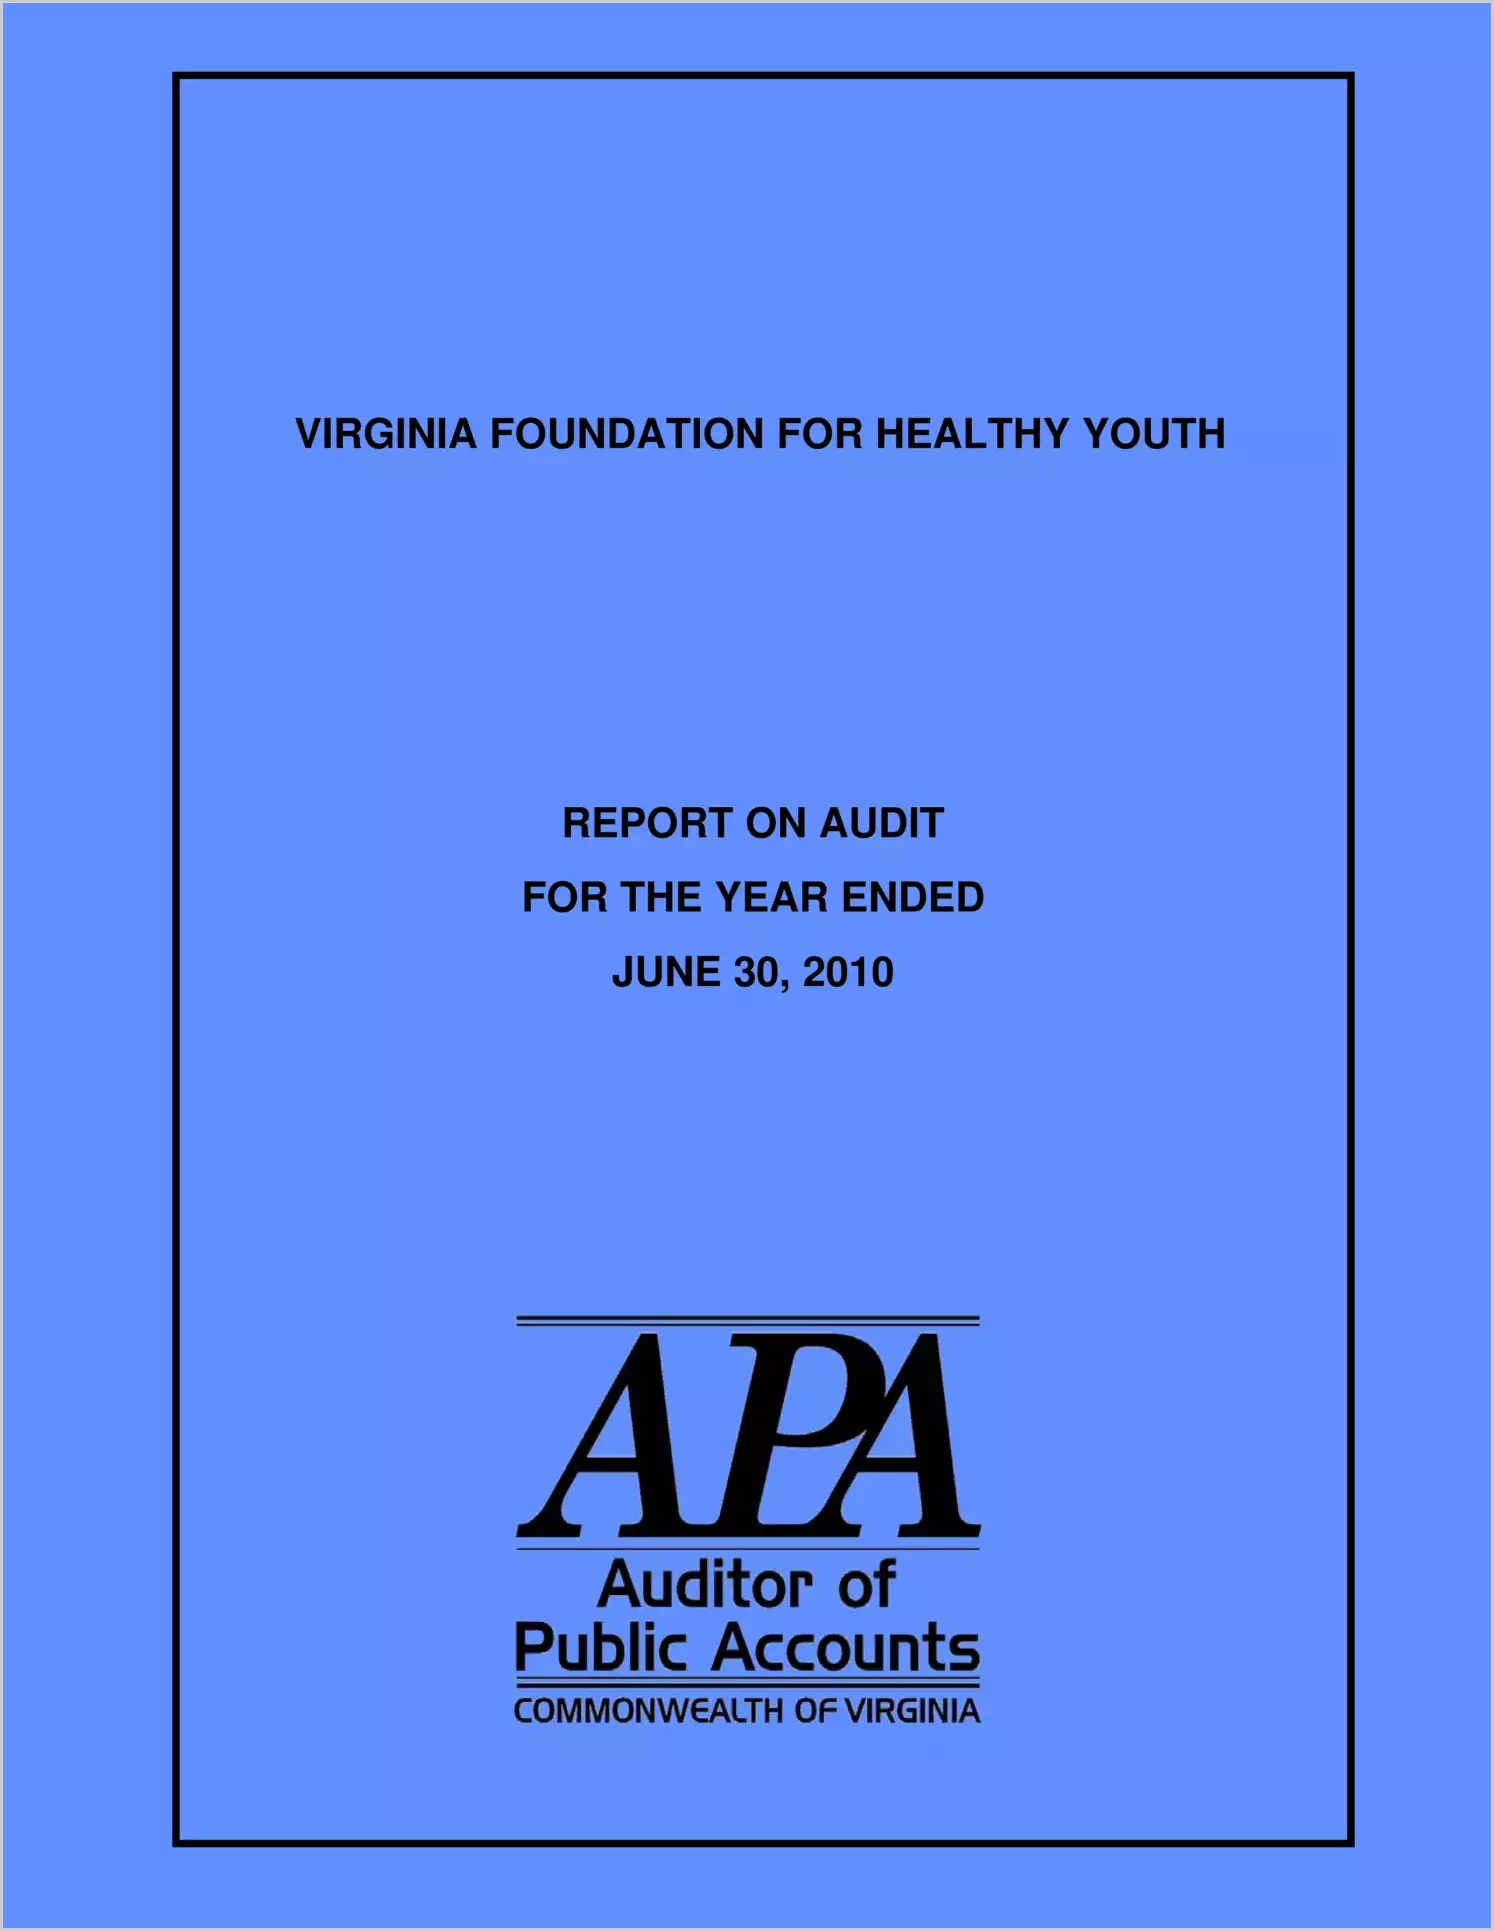 Foundation for Healthy Youth for the year ended June 30, 2010